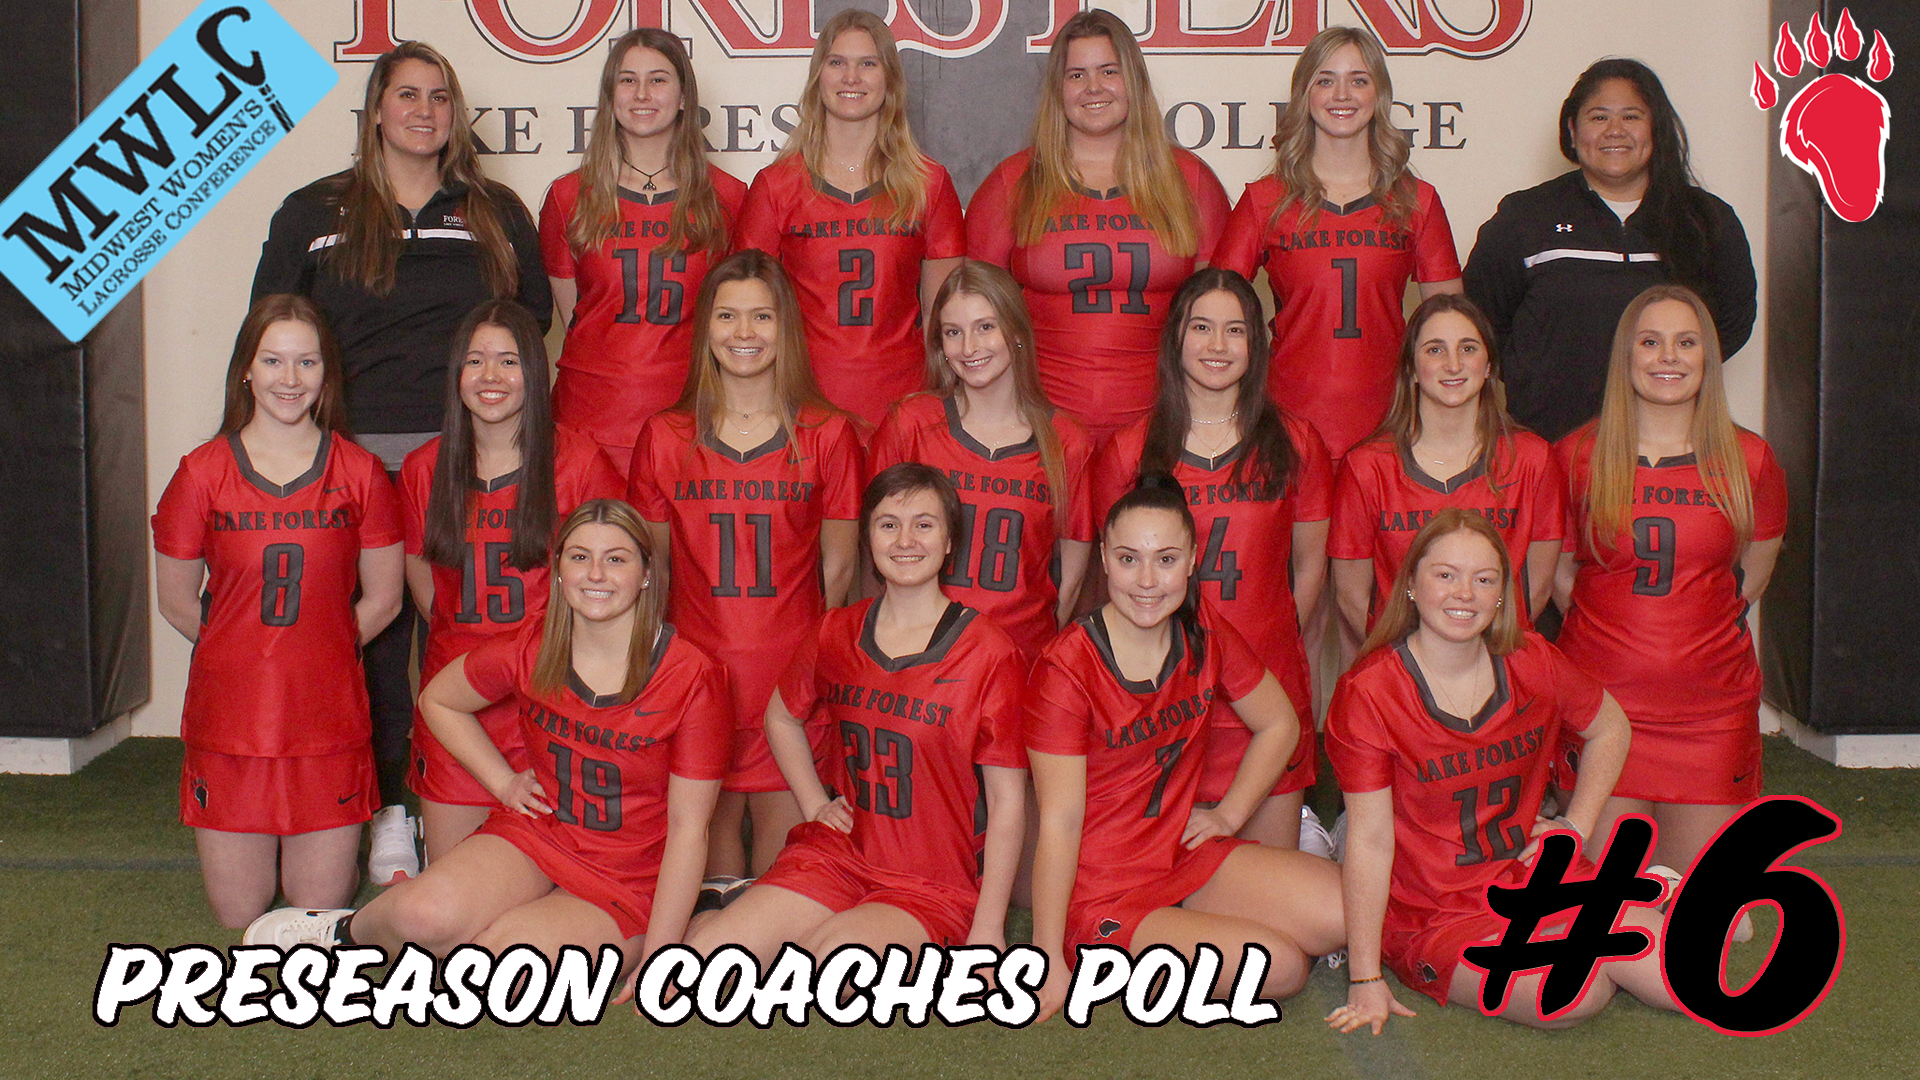 Lake Forest Listed Sixth in MWLC Preseason Coaches Poll